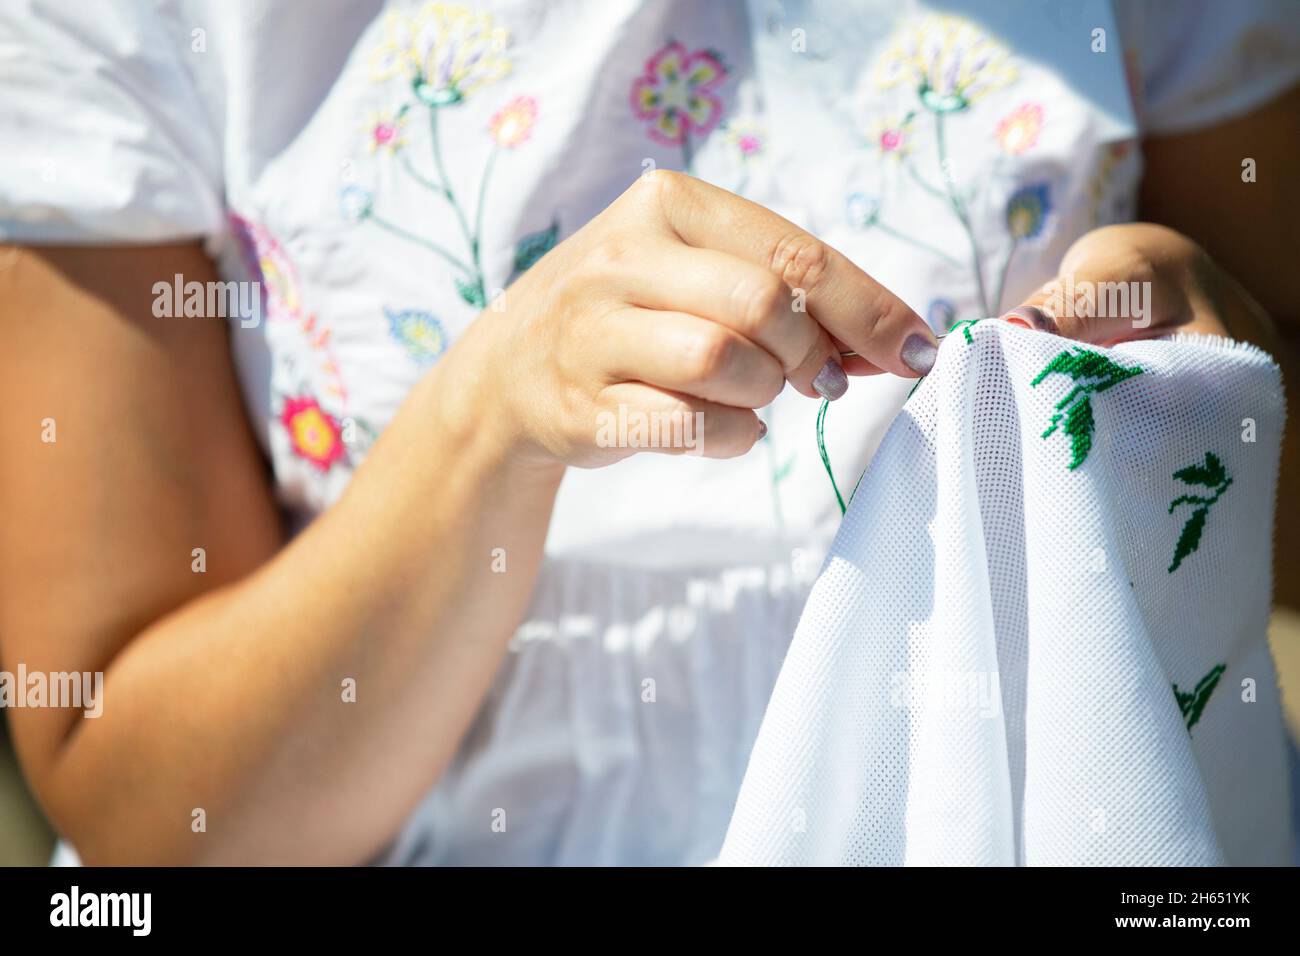 Hands are embroidered with a cross. Needlework and folk art. Stock Photo